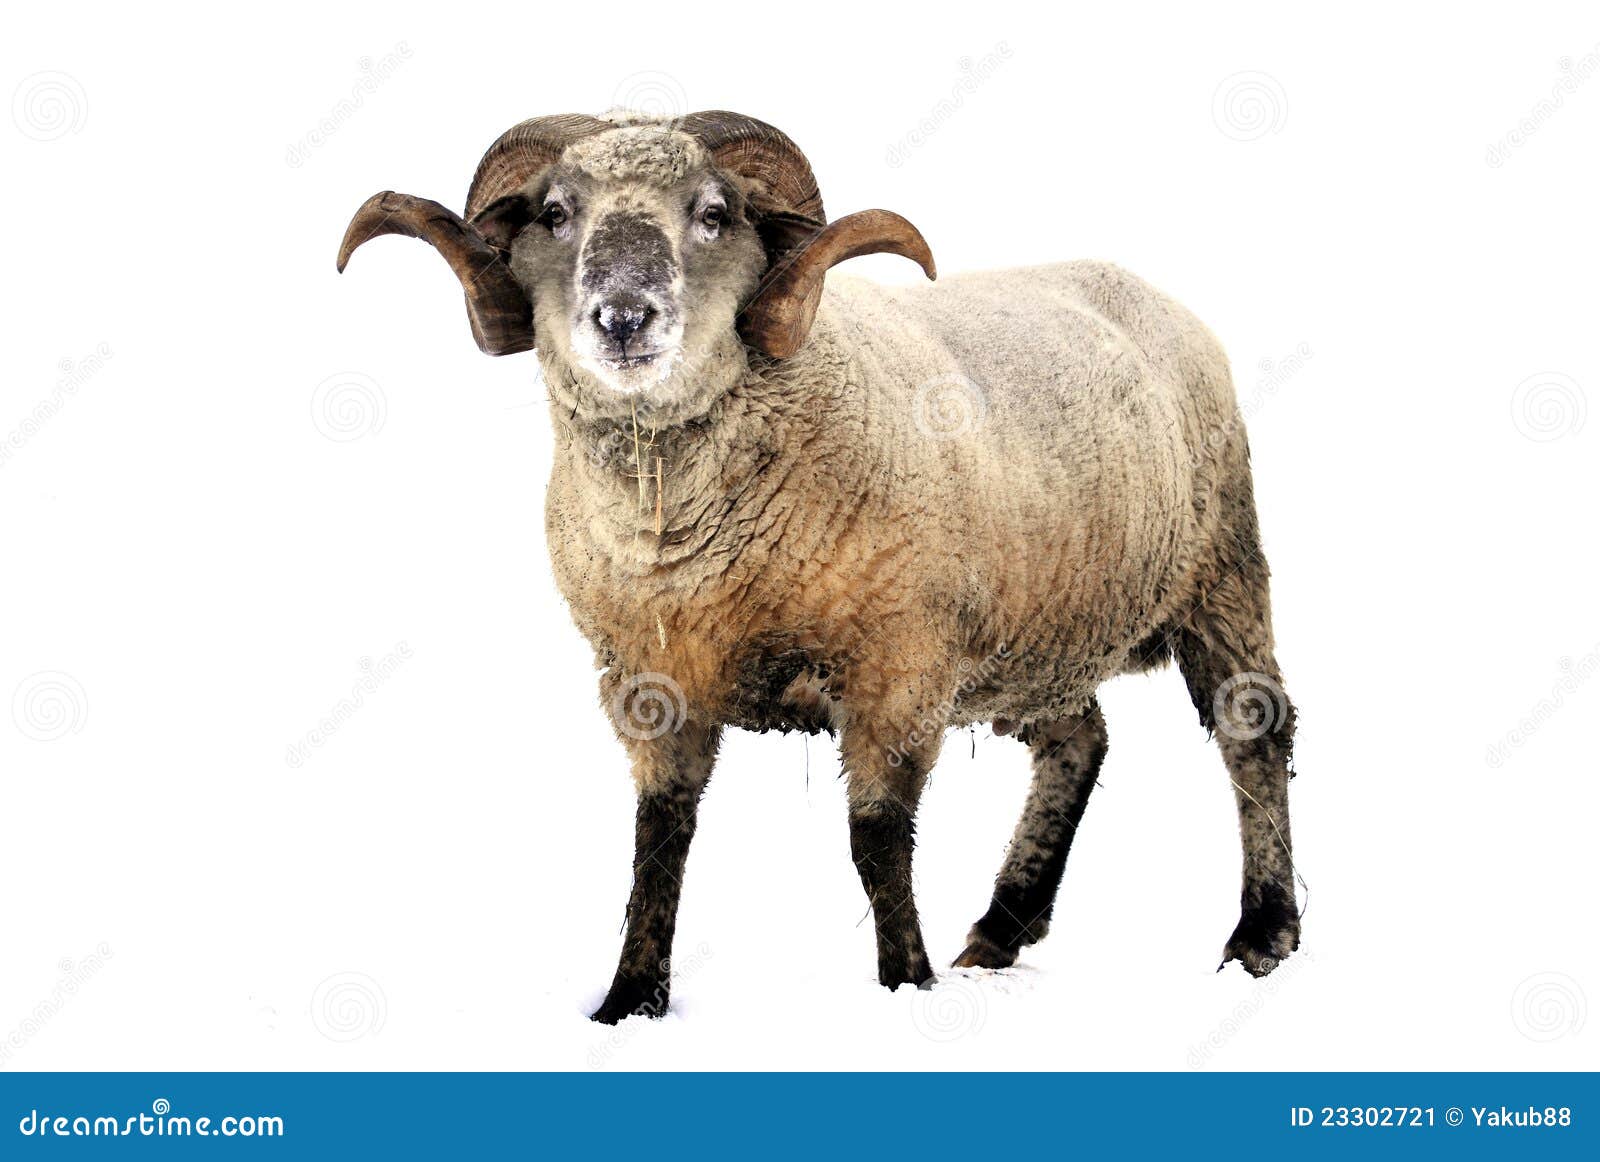 Ram stock image. Image of domestic, live, country, zoology - 23302721